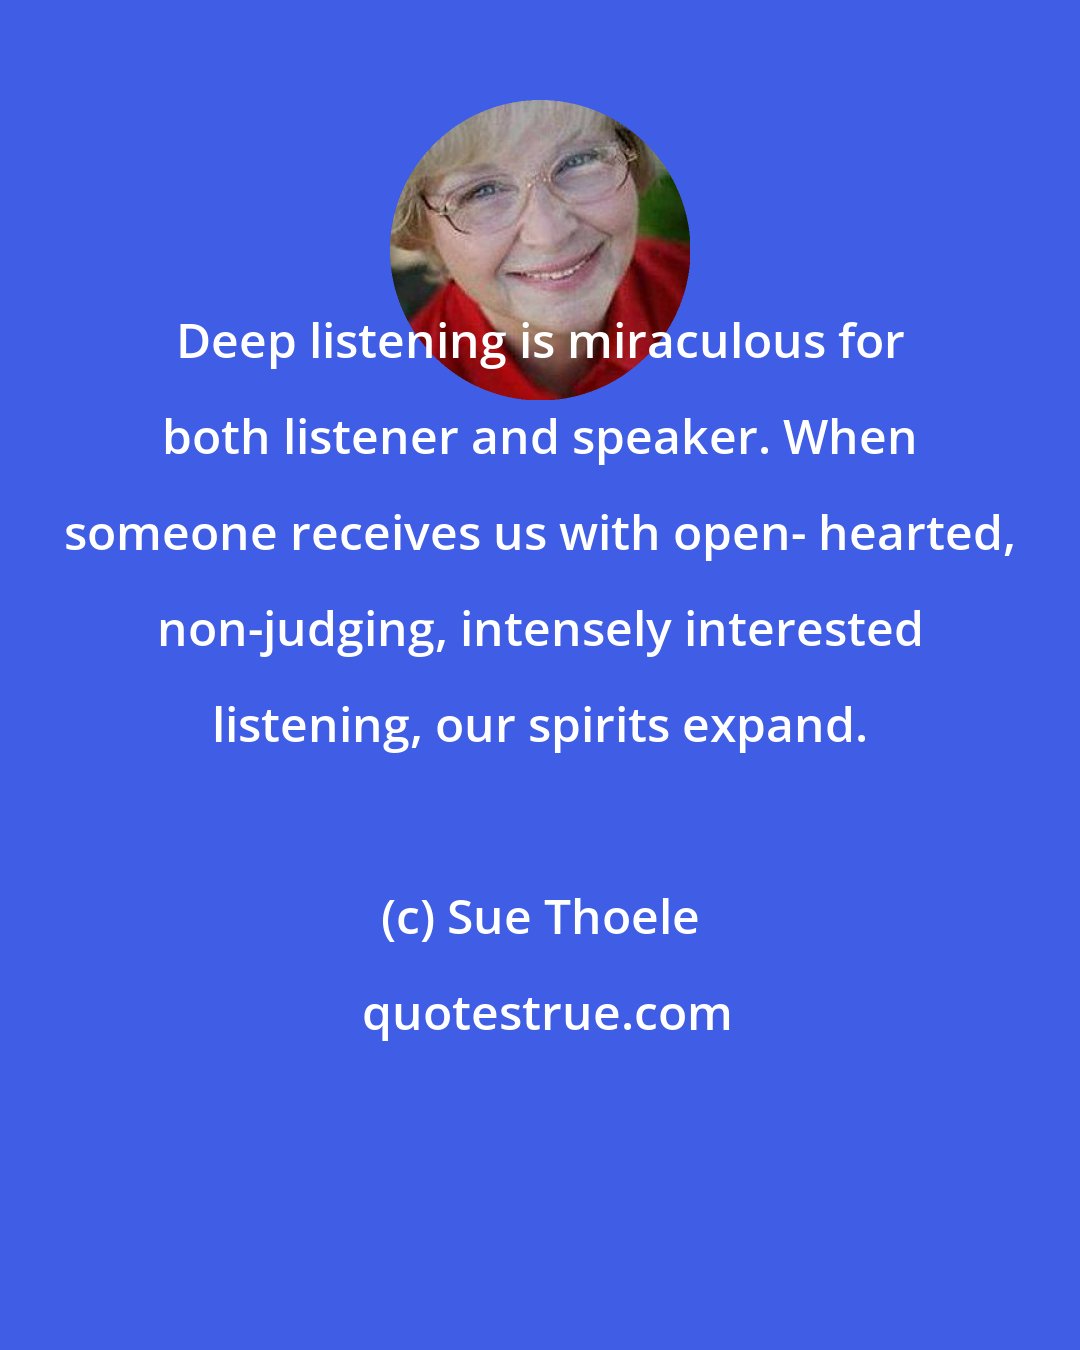 Sue Thoele: Deep listening is miraculous for both listener and speaker. When someone receives us with open- hearted, non-judging, intensely interested listening, our spirits expand.